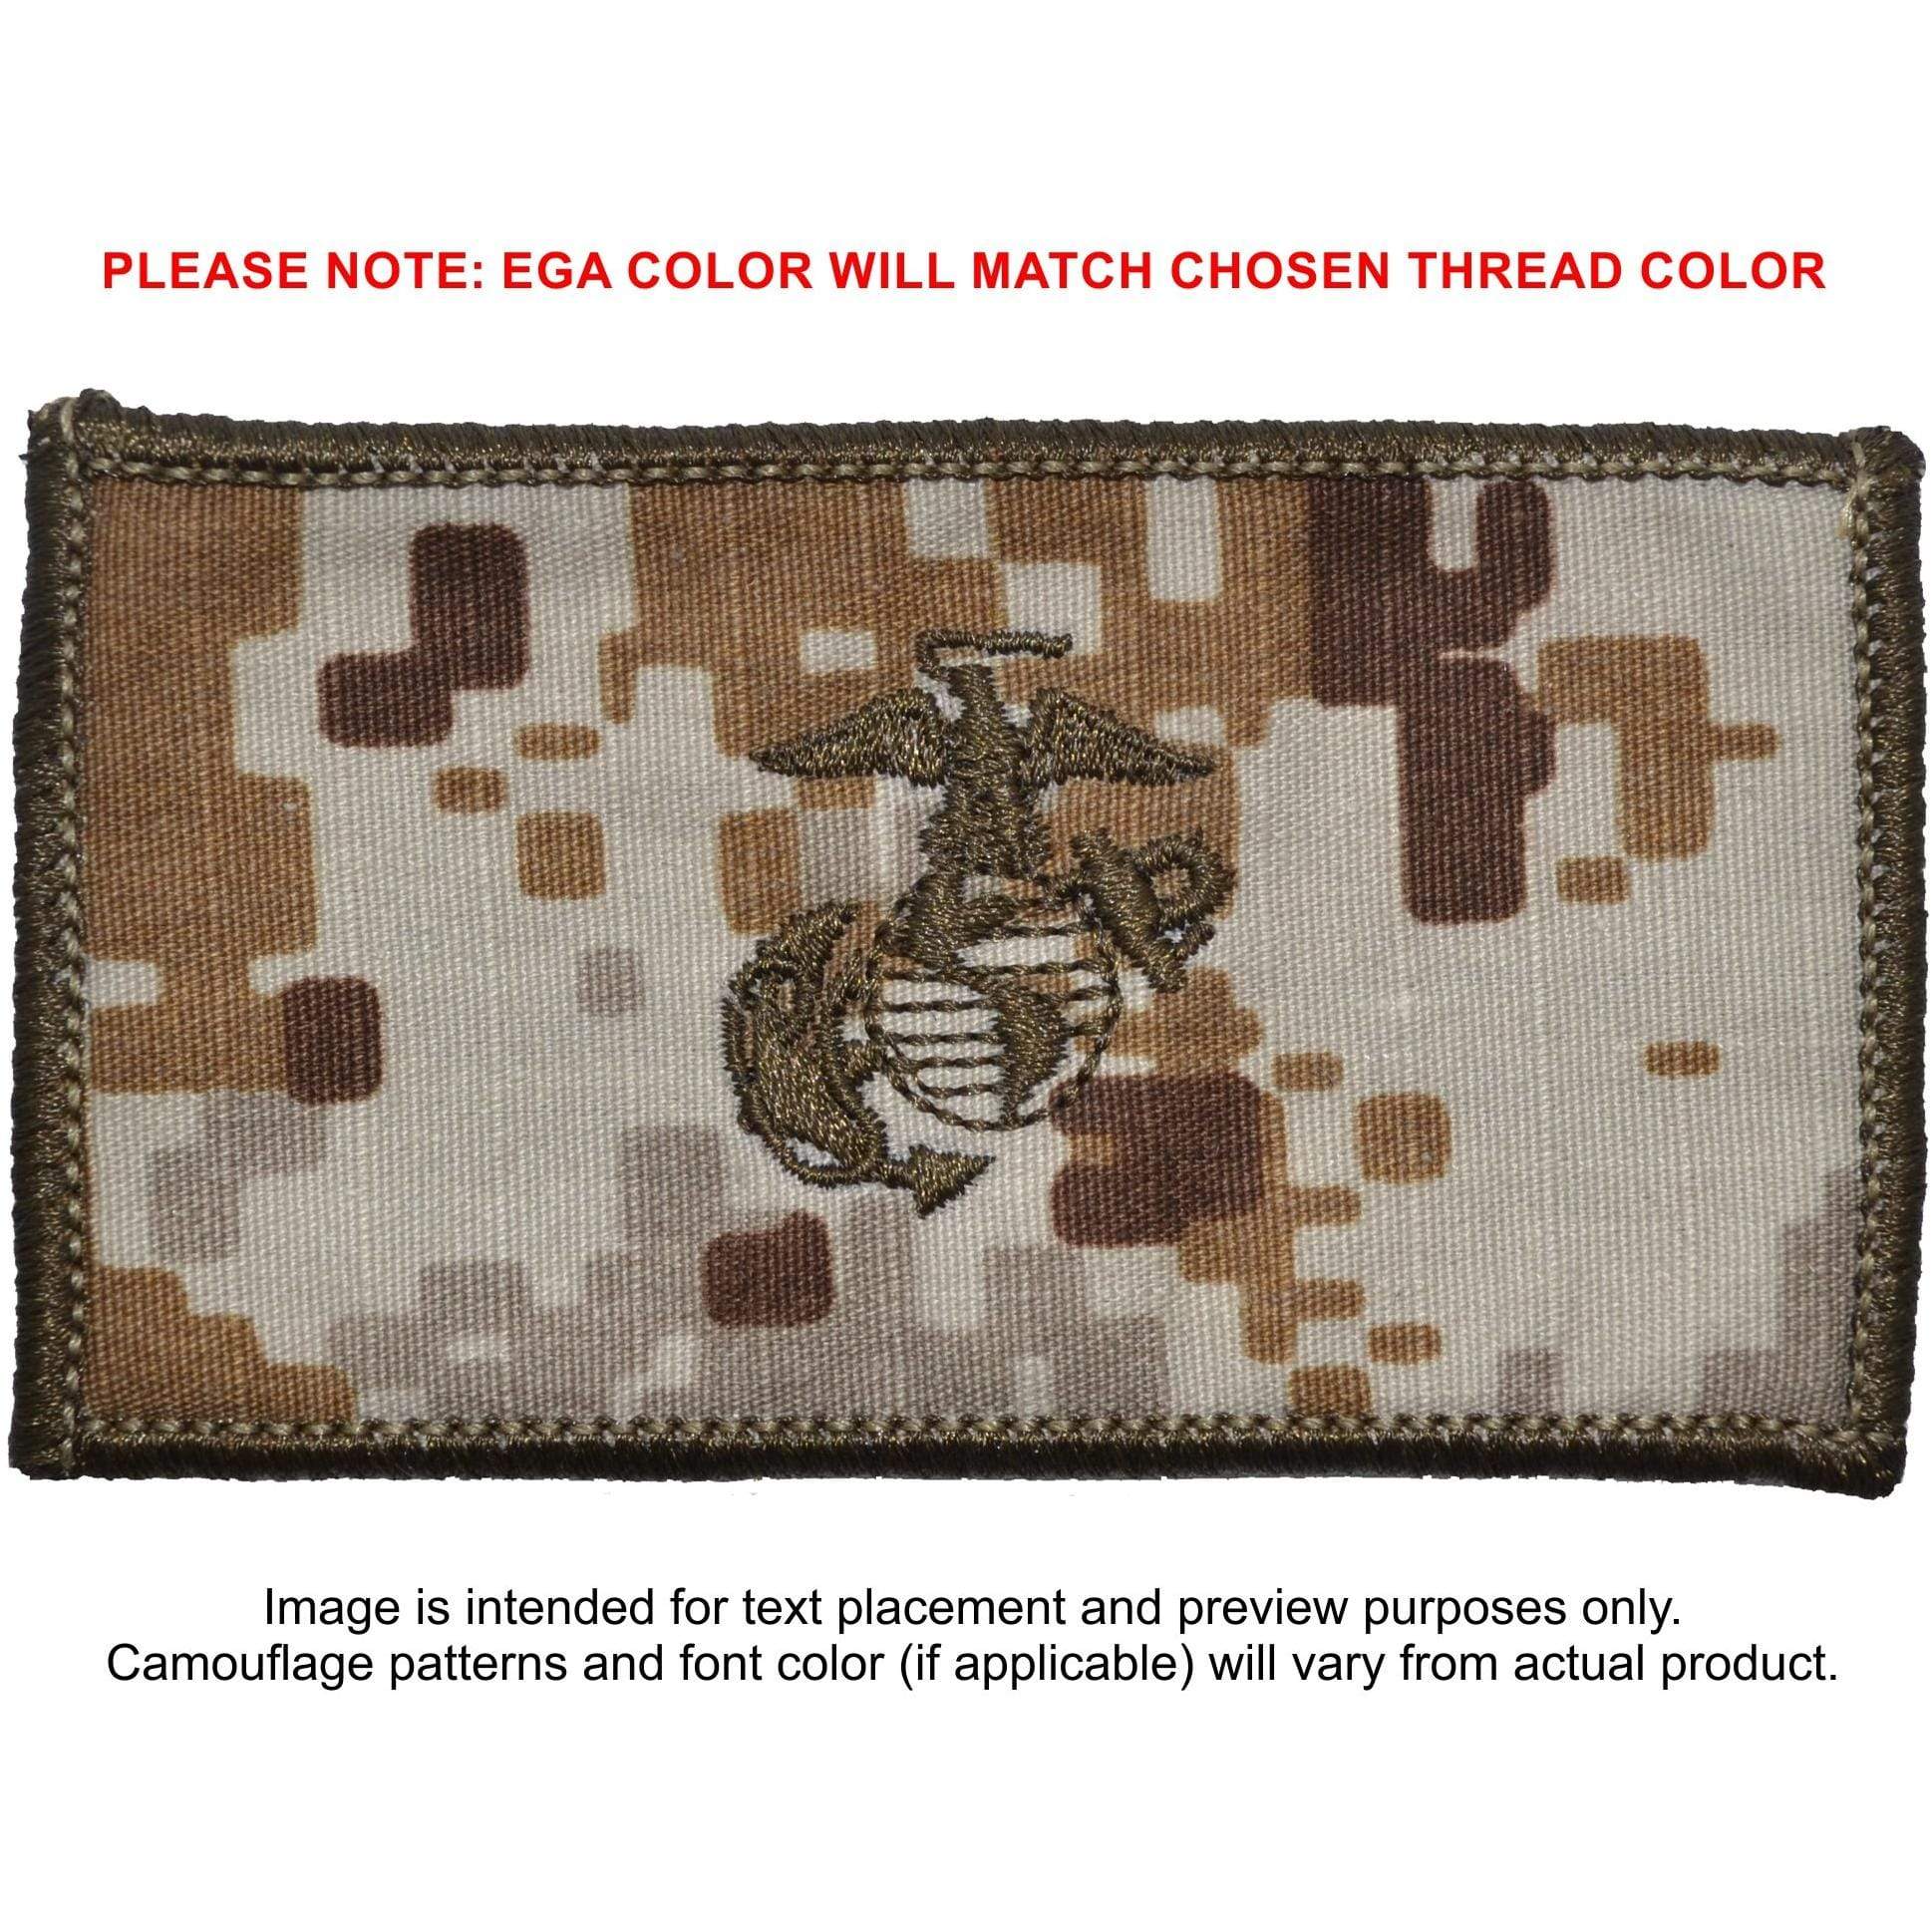 USMC Plate Carrier Flak Patch - Eagle Globe and Anchor Graphic (Filled Globe) Olive Drab | Tactical Gear Junkie